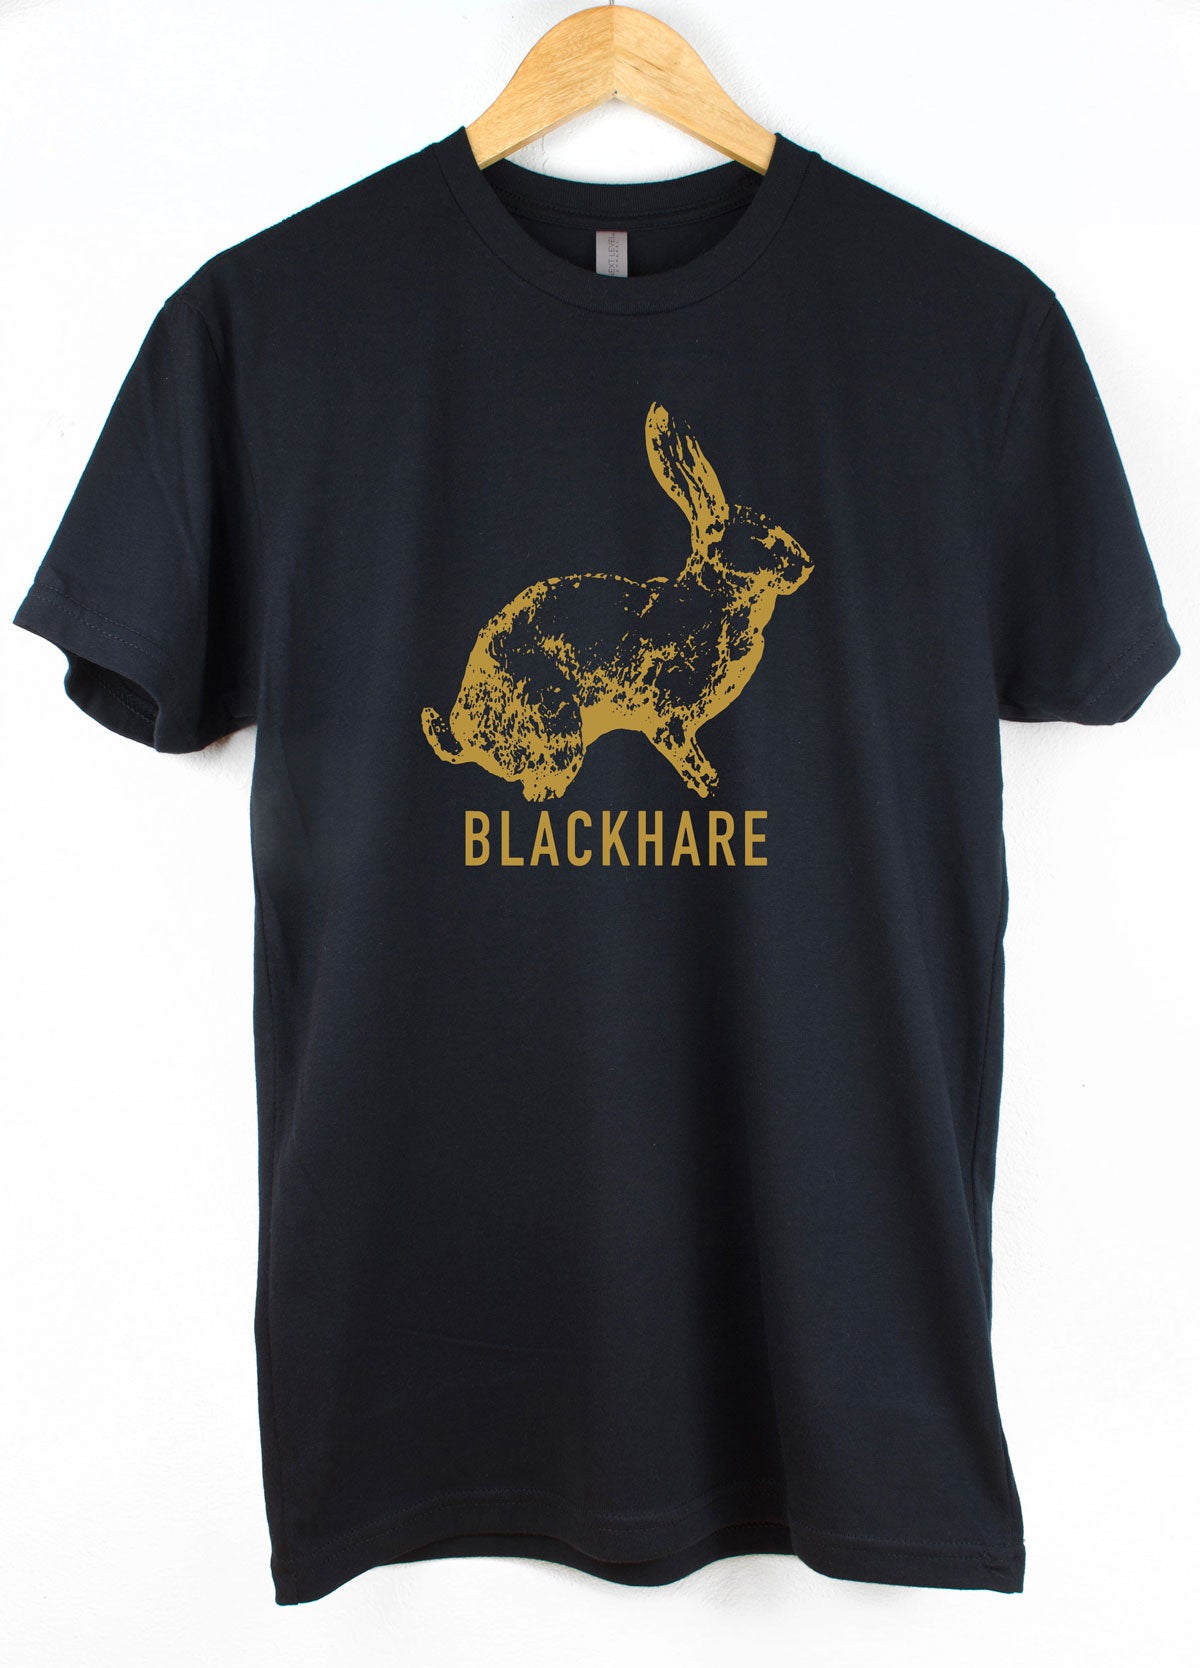 Size Chart for Graphic Tees - Unisex, Women's, and Kids – Blackhare